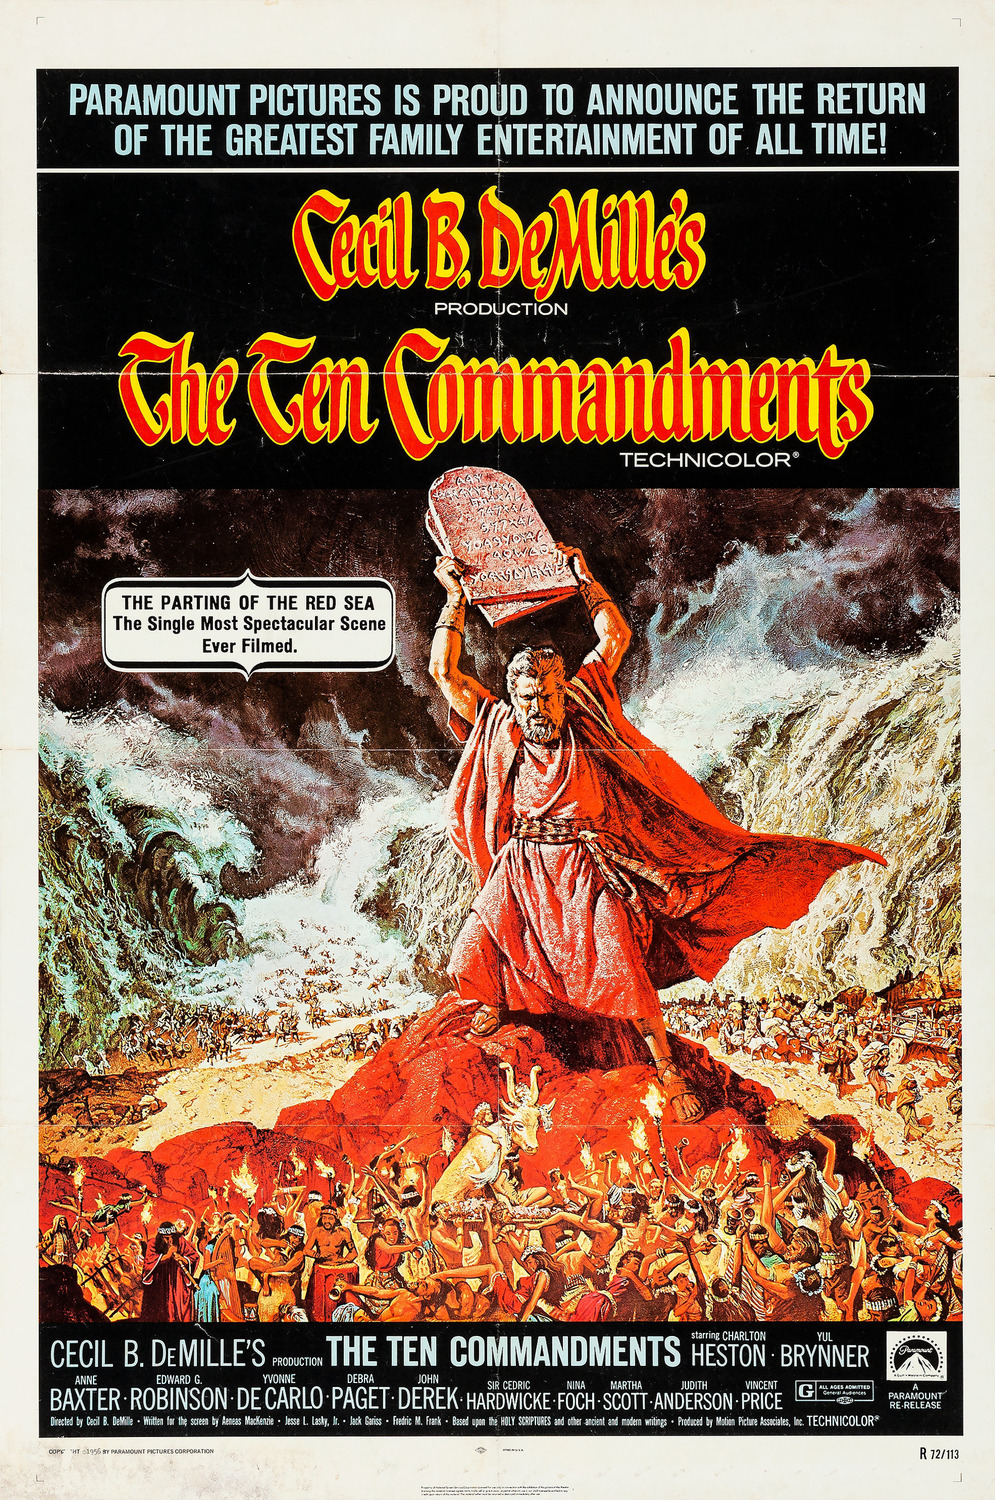 the ten commandments movie when is it on